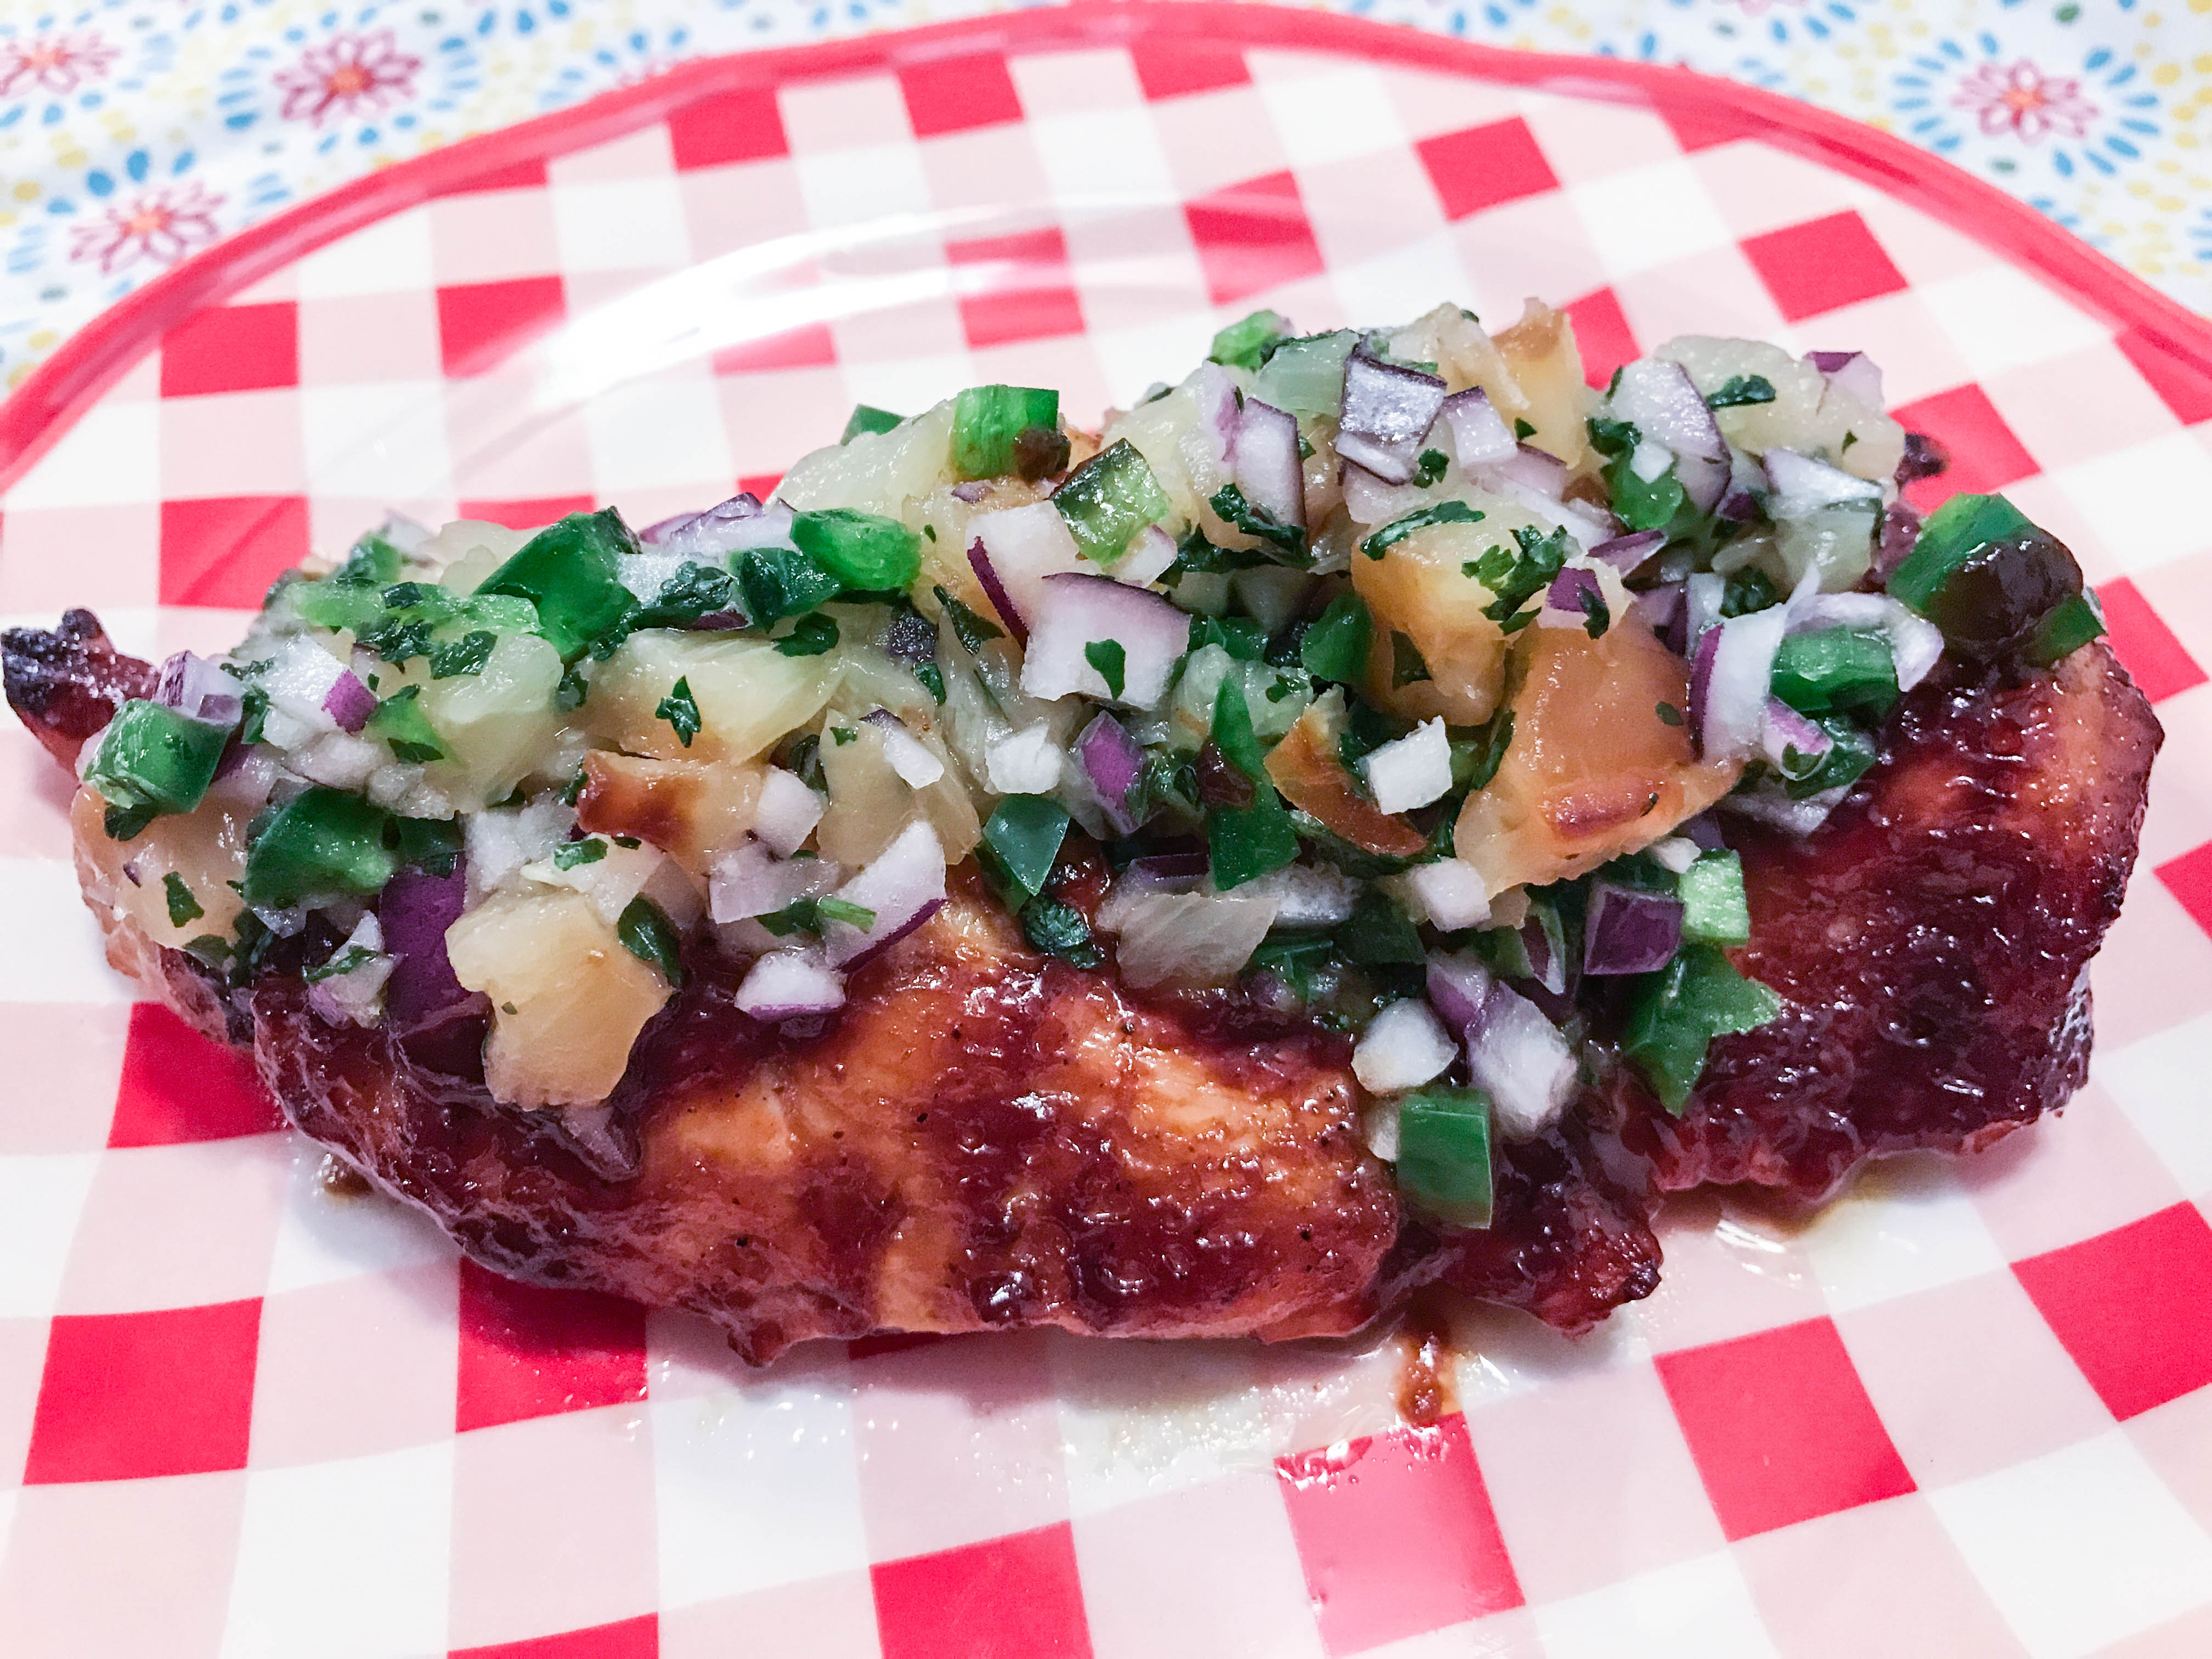 A sweet and spicy chicken breast topped with homemade pineapple salsa served on a red and white checked plate.